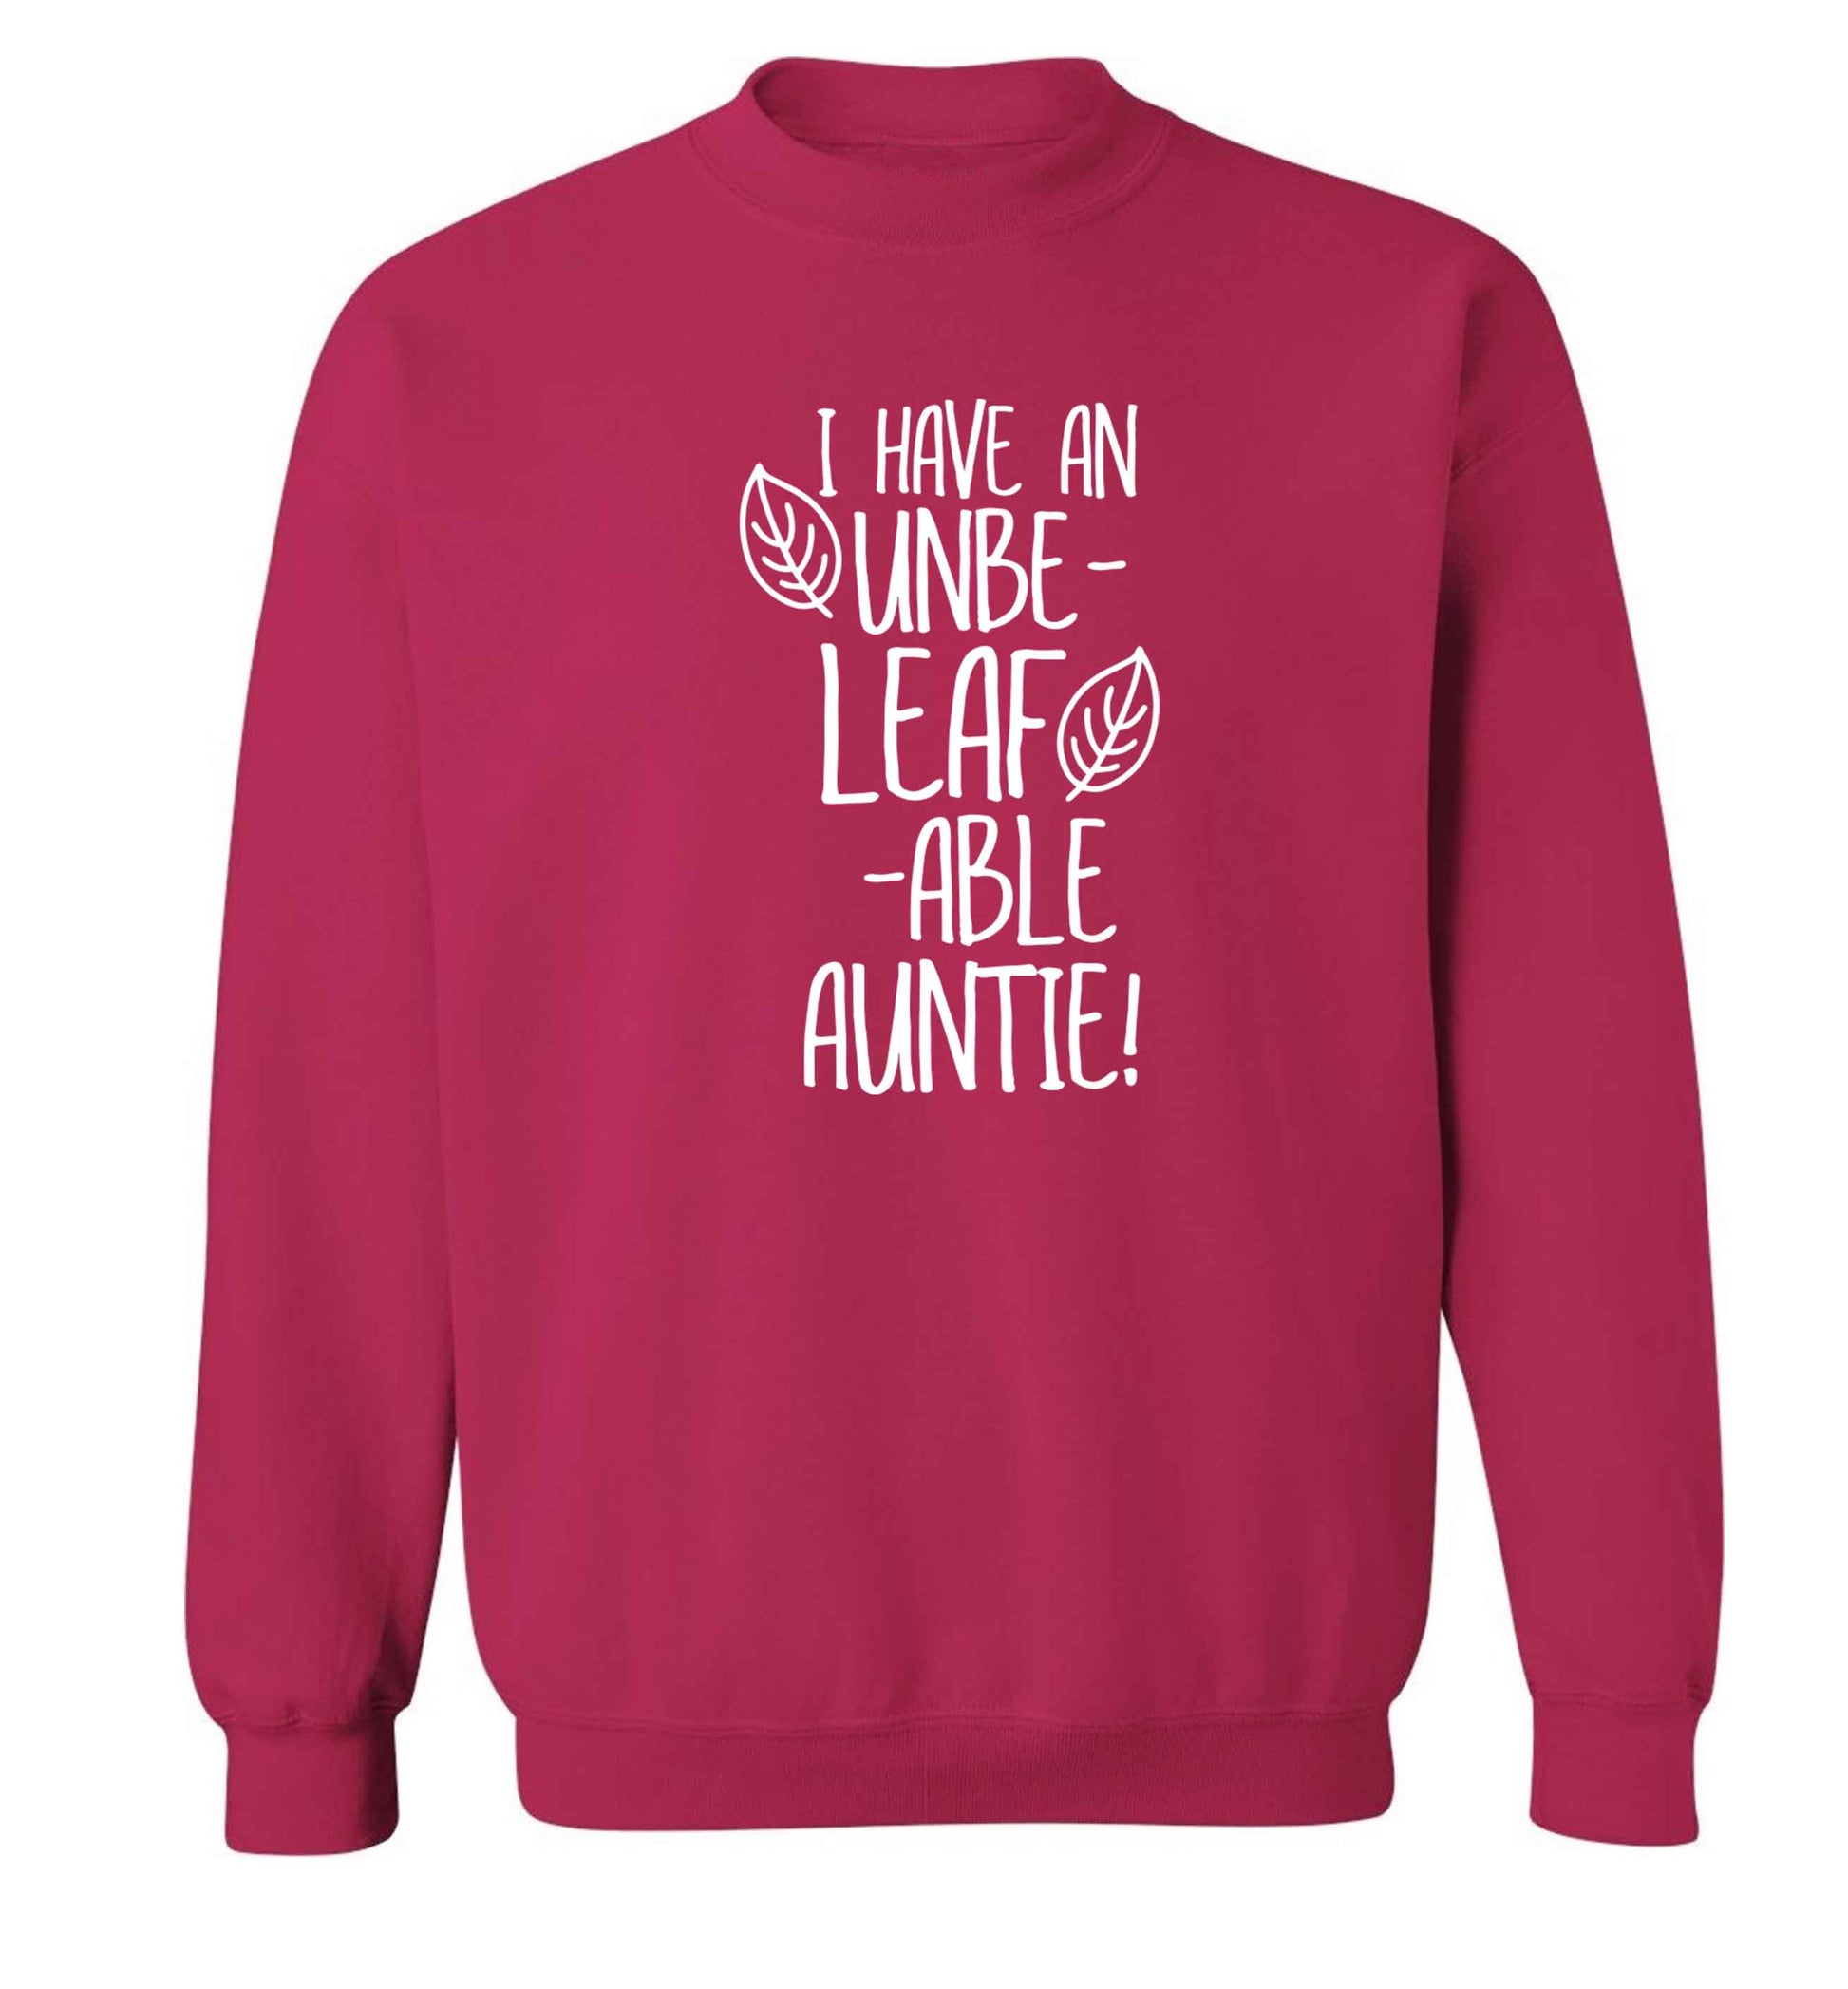 I have an unbe-leaf-able auntie Adult's unisex pink Sweater 2XL